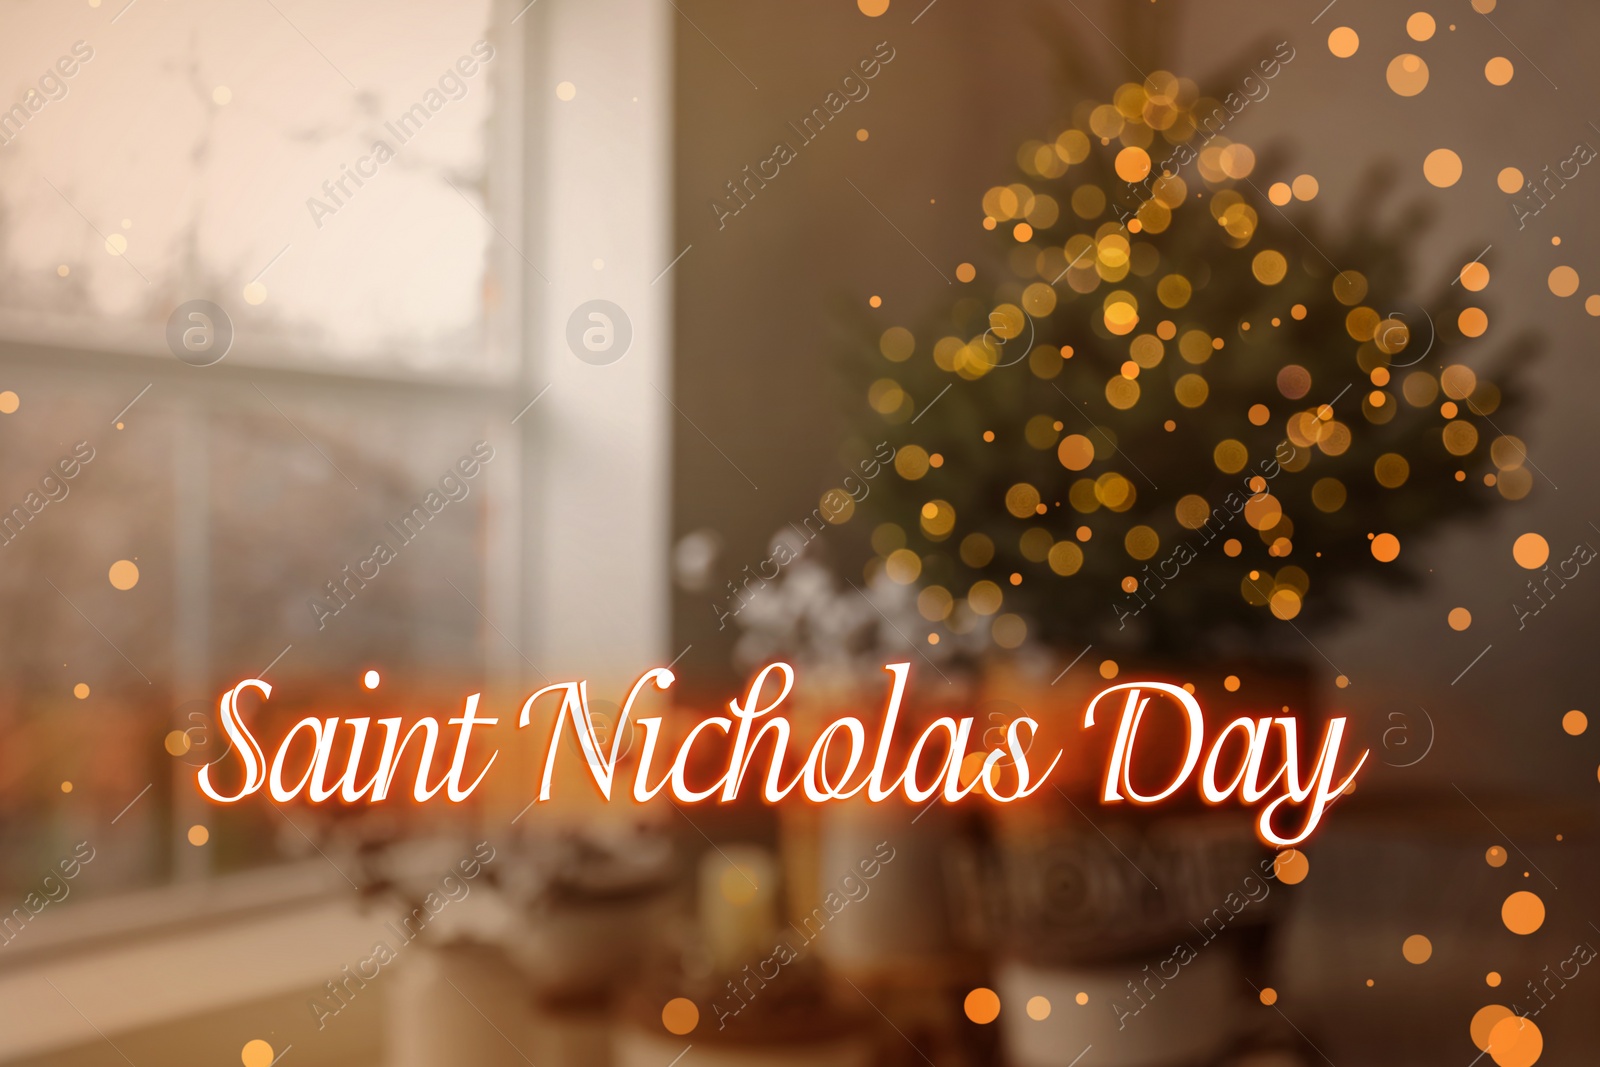 Image of Saint Nicholas Day. Blurred view of Christmas tree in room